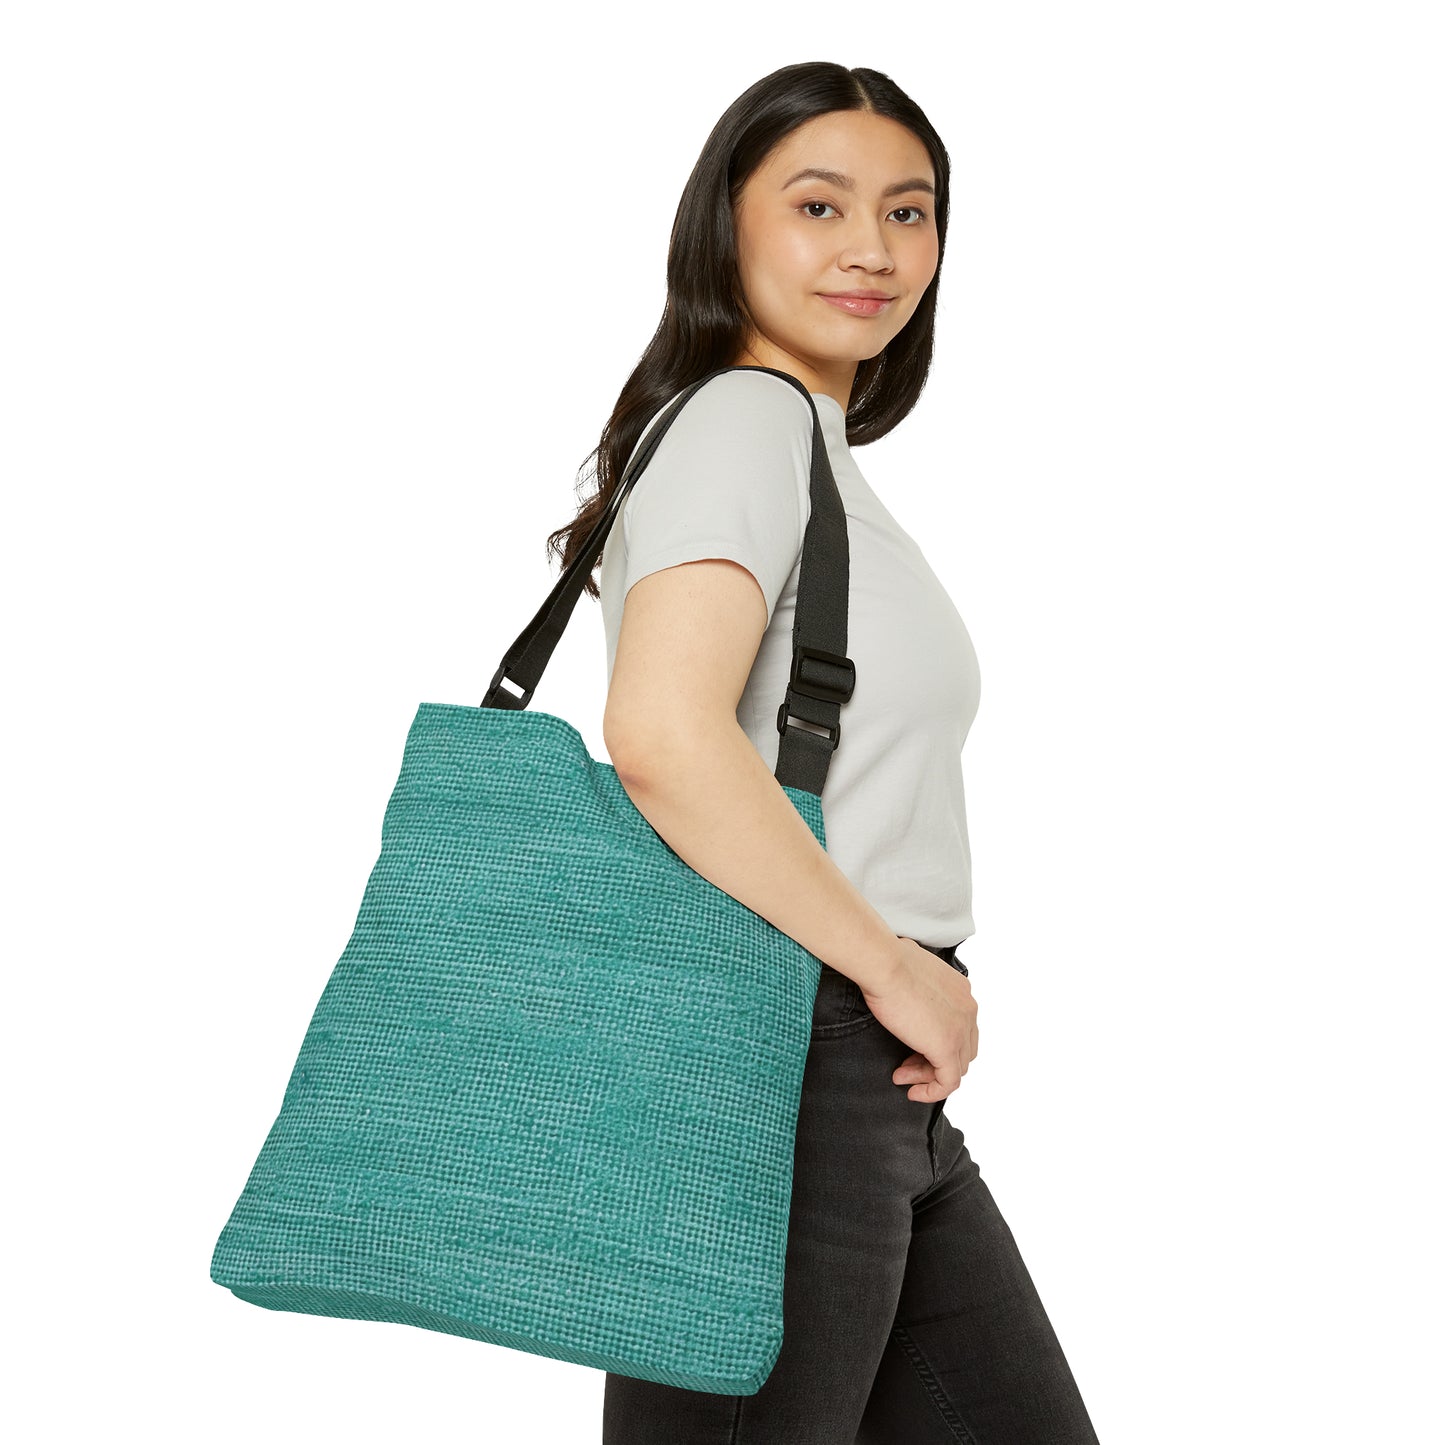 Quality Mint Turquoise Denim Fabric Deisgn, Stylish Material - Adjustable Tote Bag (AOP)